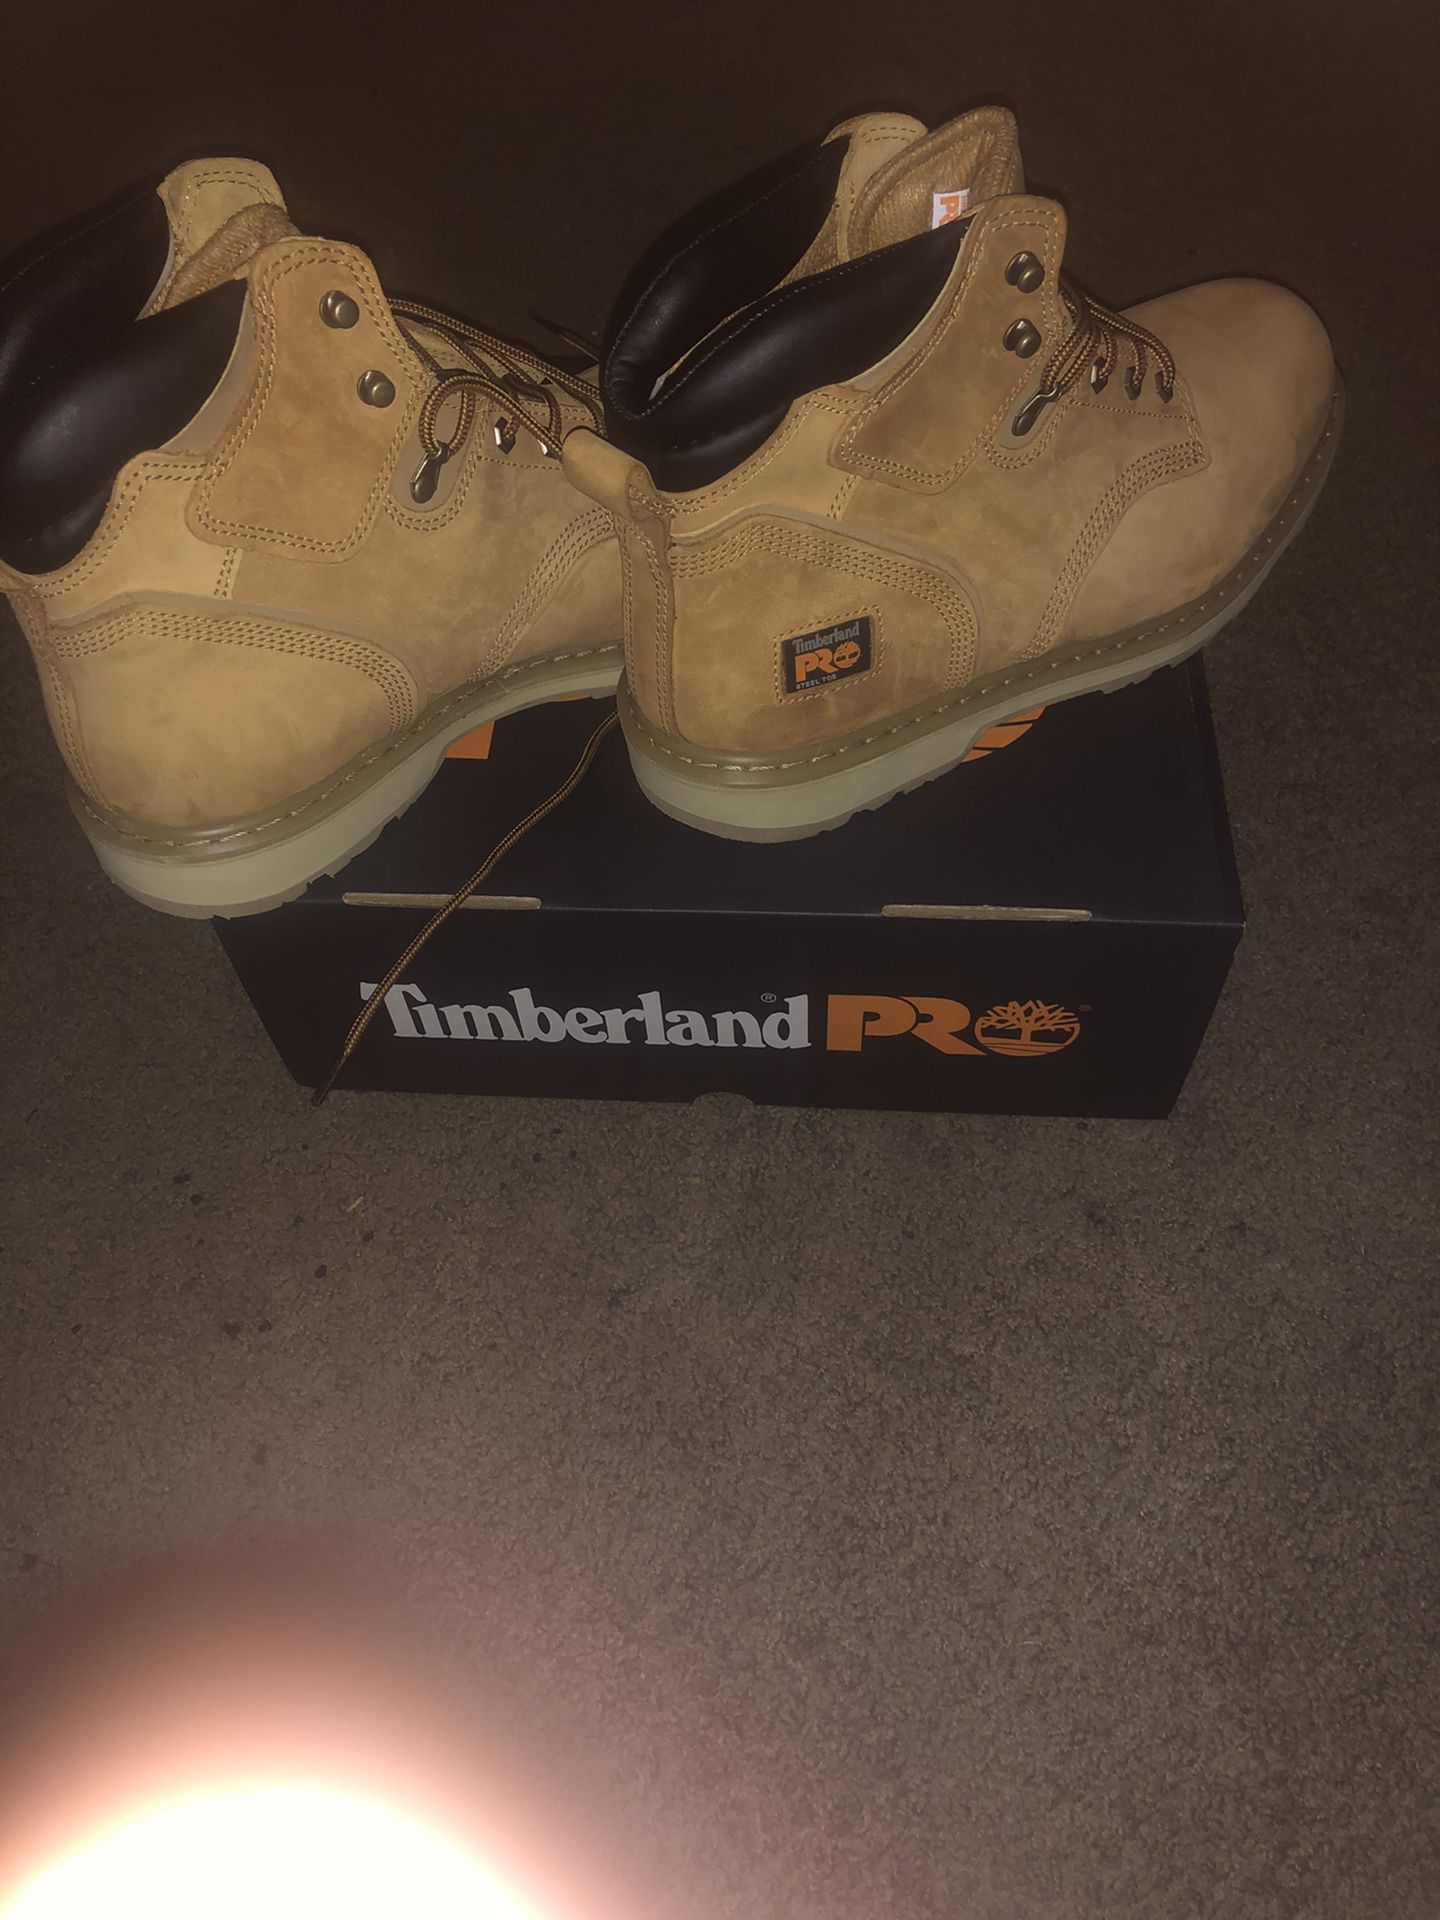 Timberland Pro steel toe work boot 6” size 12